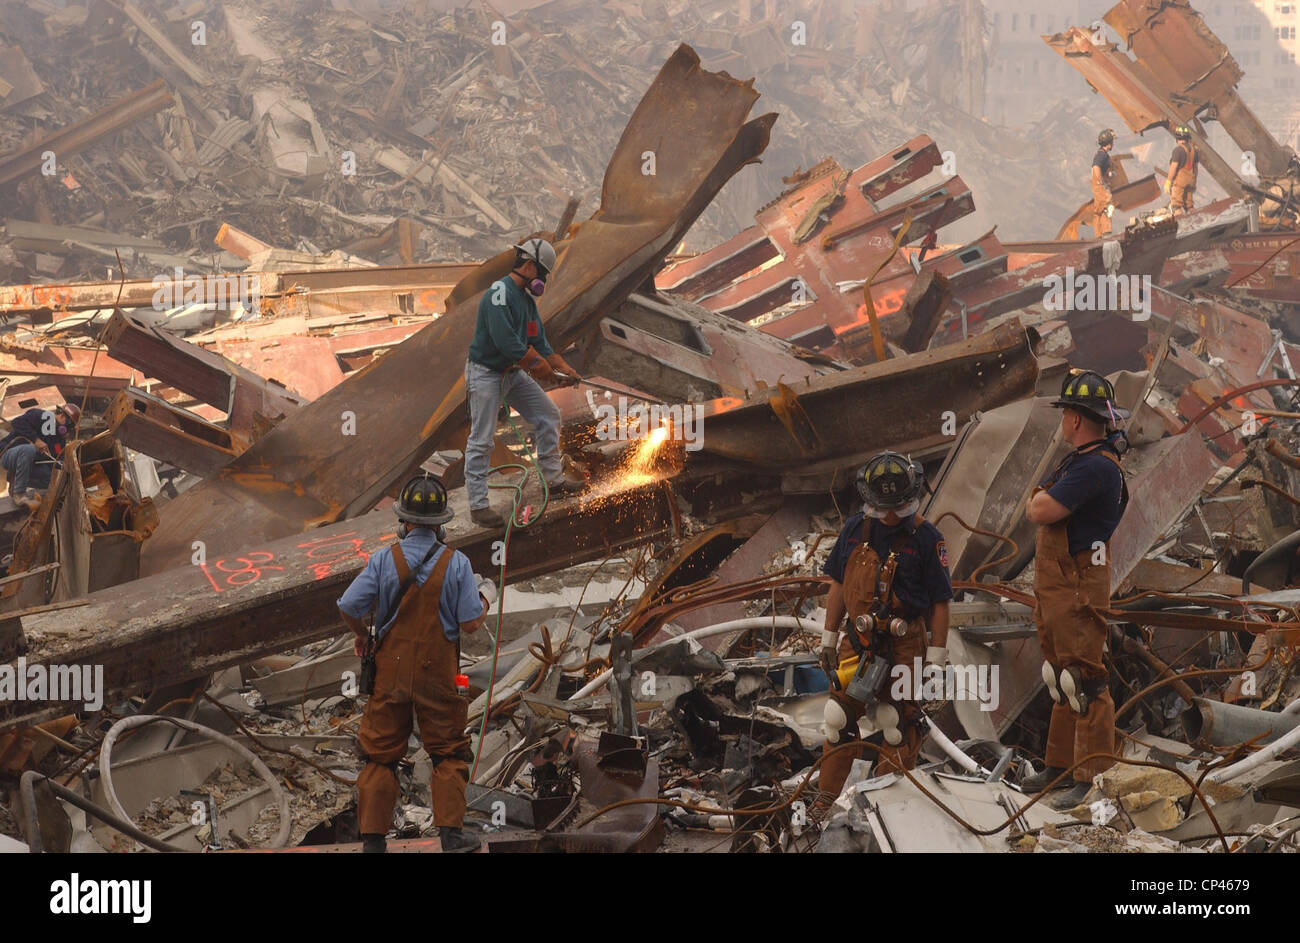 dwarfed-by-the-debris-from-the-collapsed-world-trade-center-the-metal-cp4679.jpg